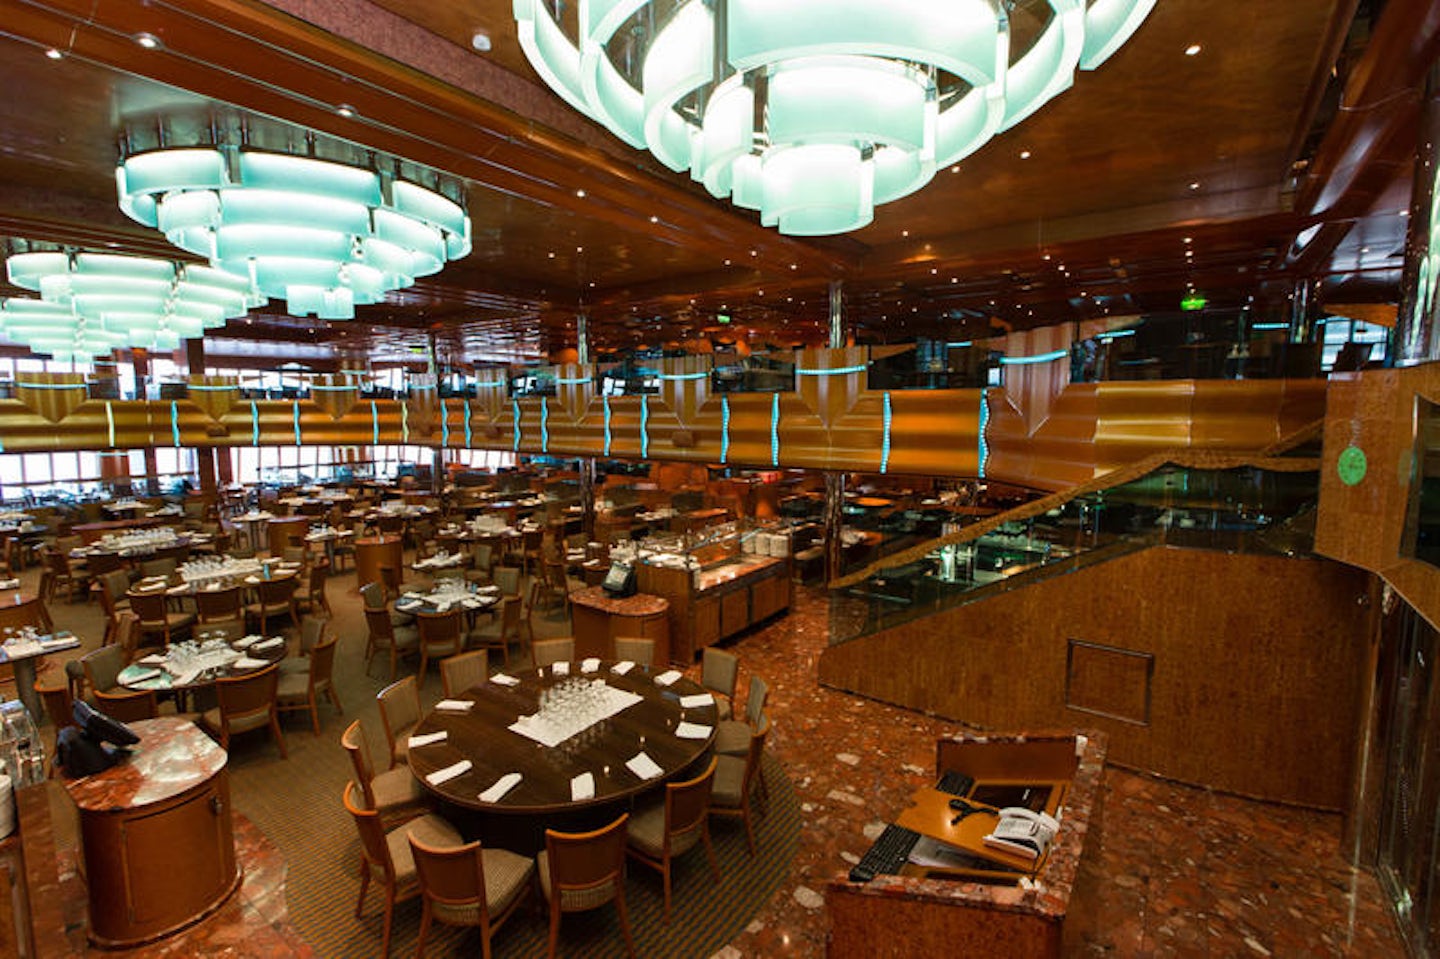 Southern Lights Dining Room Carnival Magic